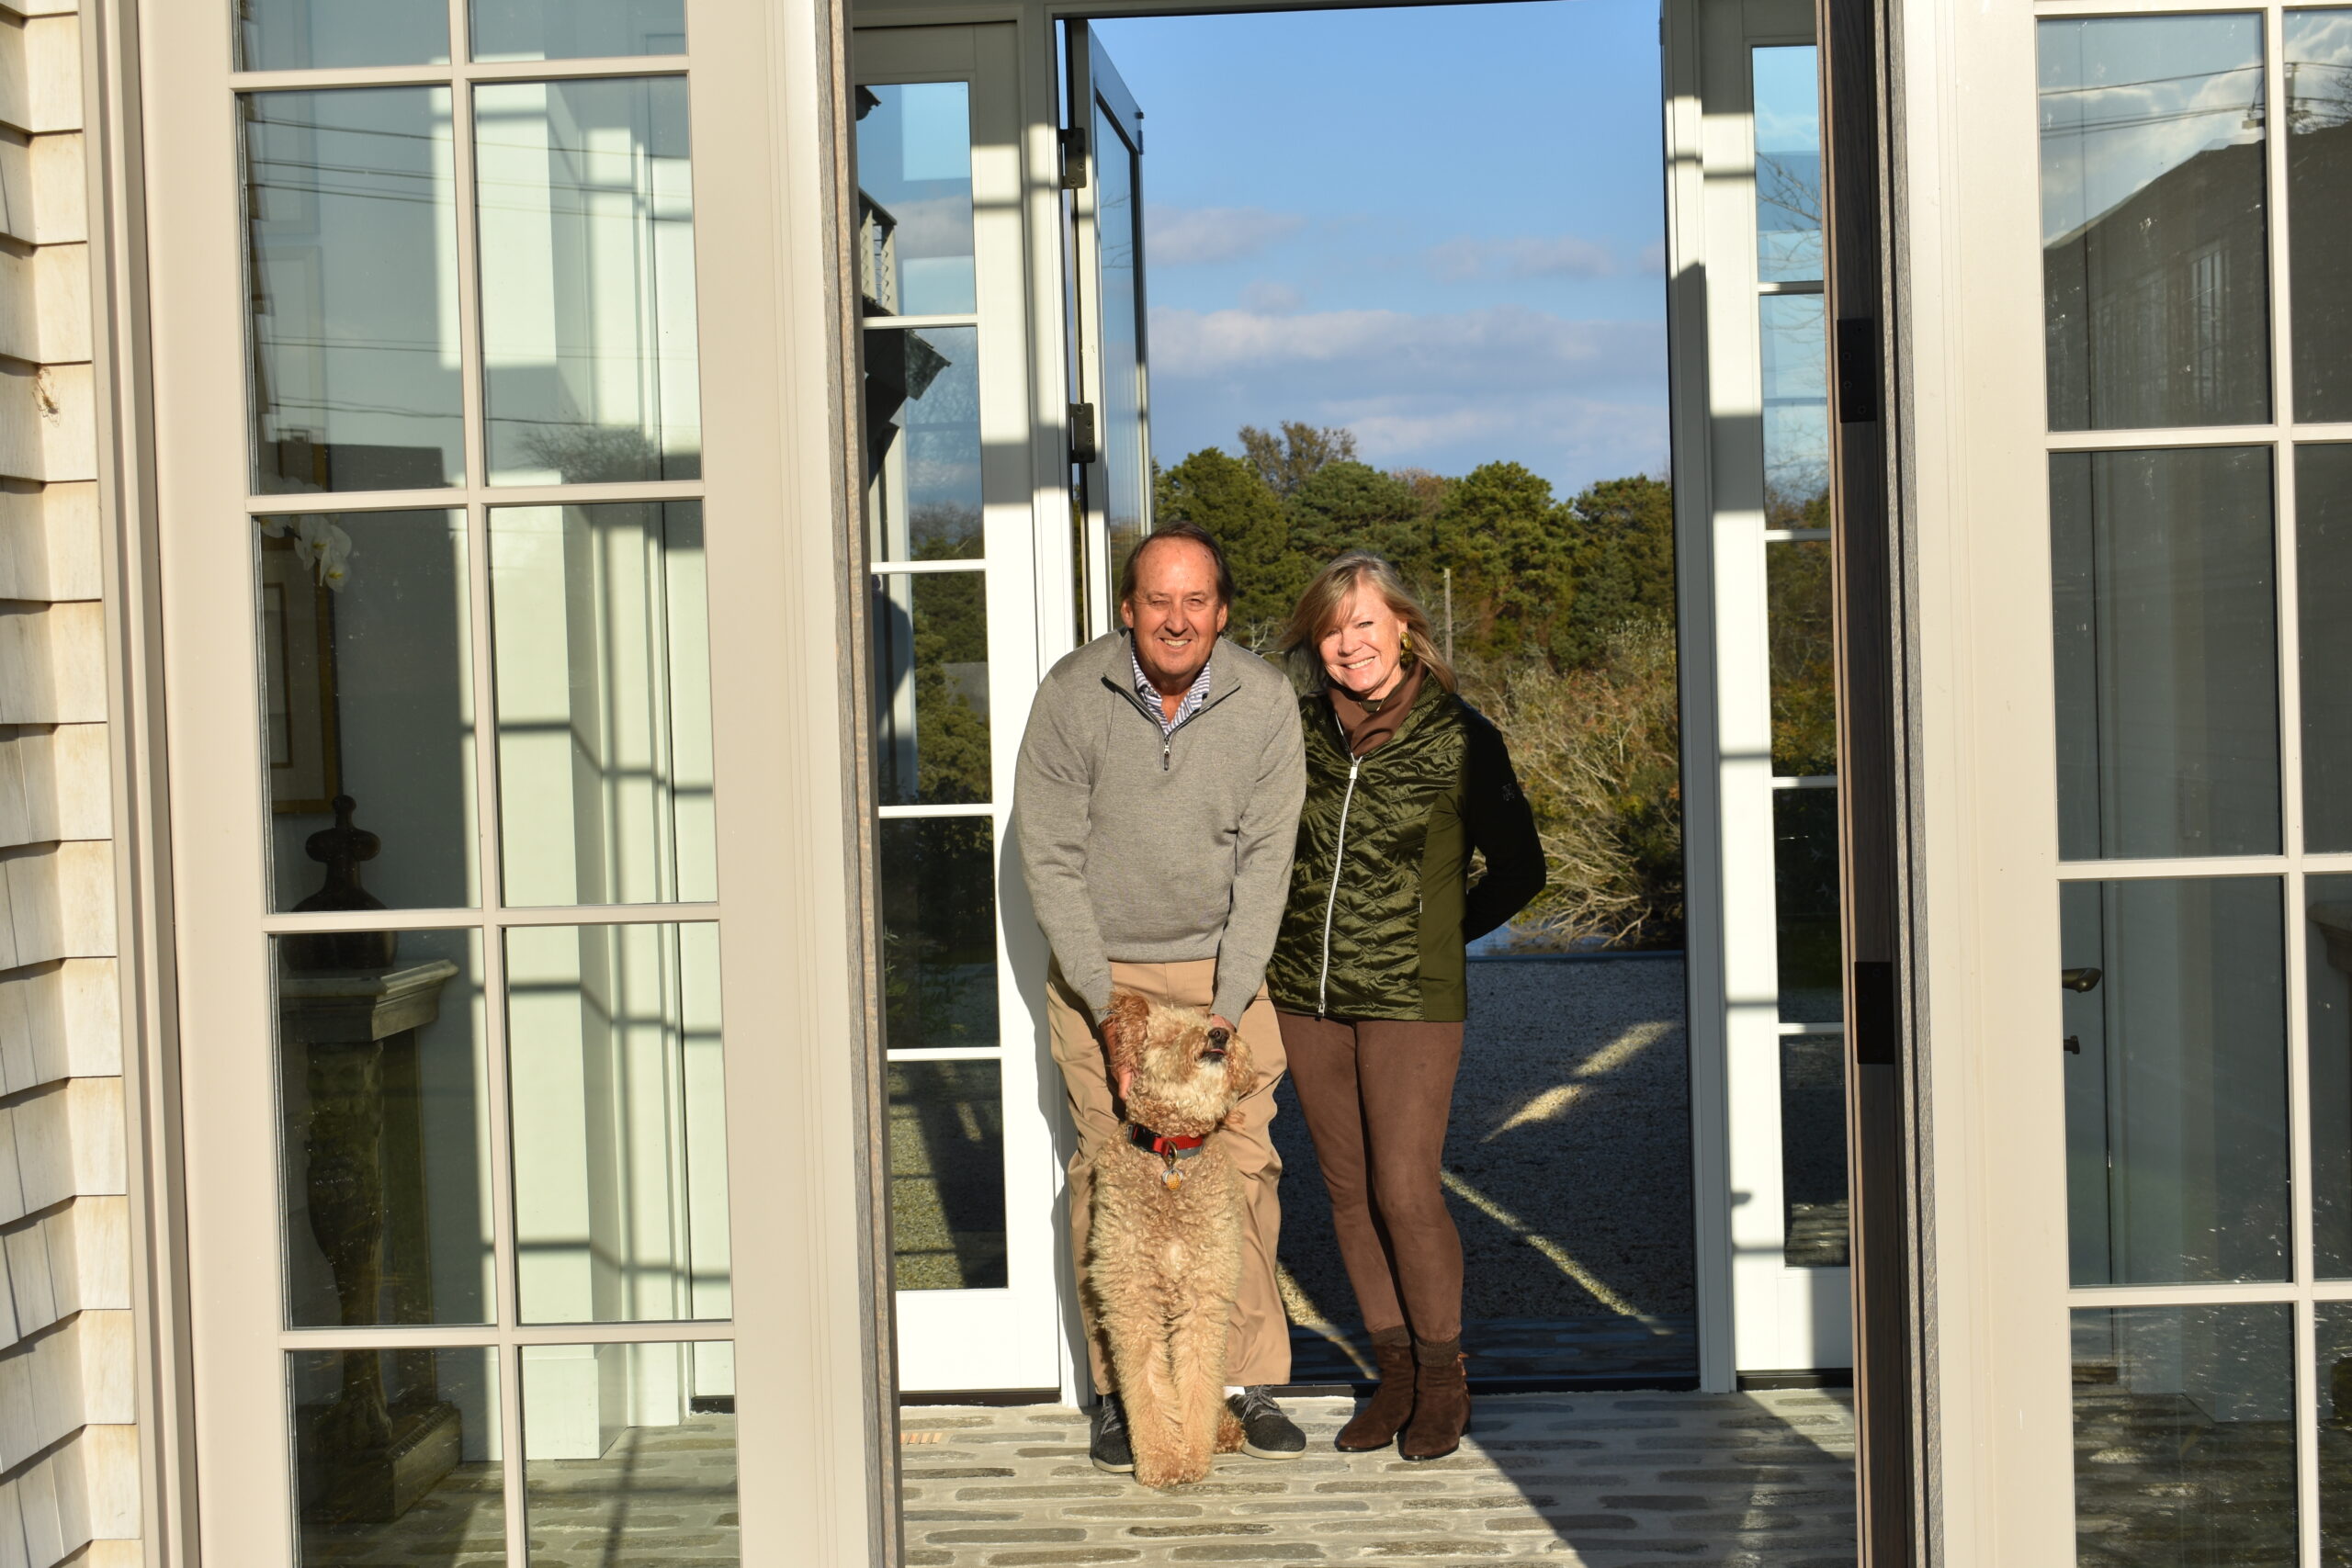 Chester and Christy Murray with their dog, Chewey, in the entrance of their home in Quogue, which will be a stop on the Quogue Historical Society Holiday House tour.